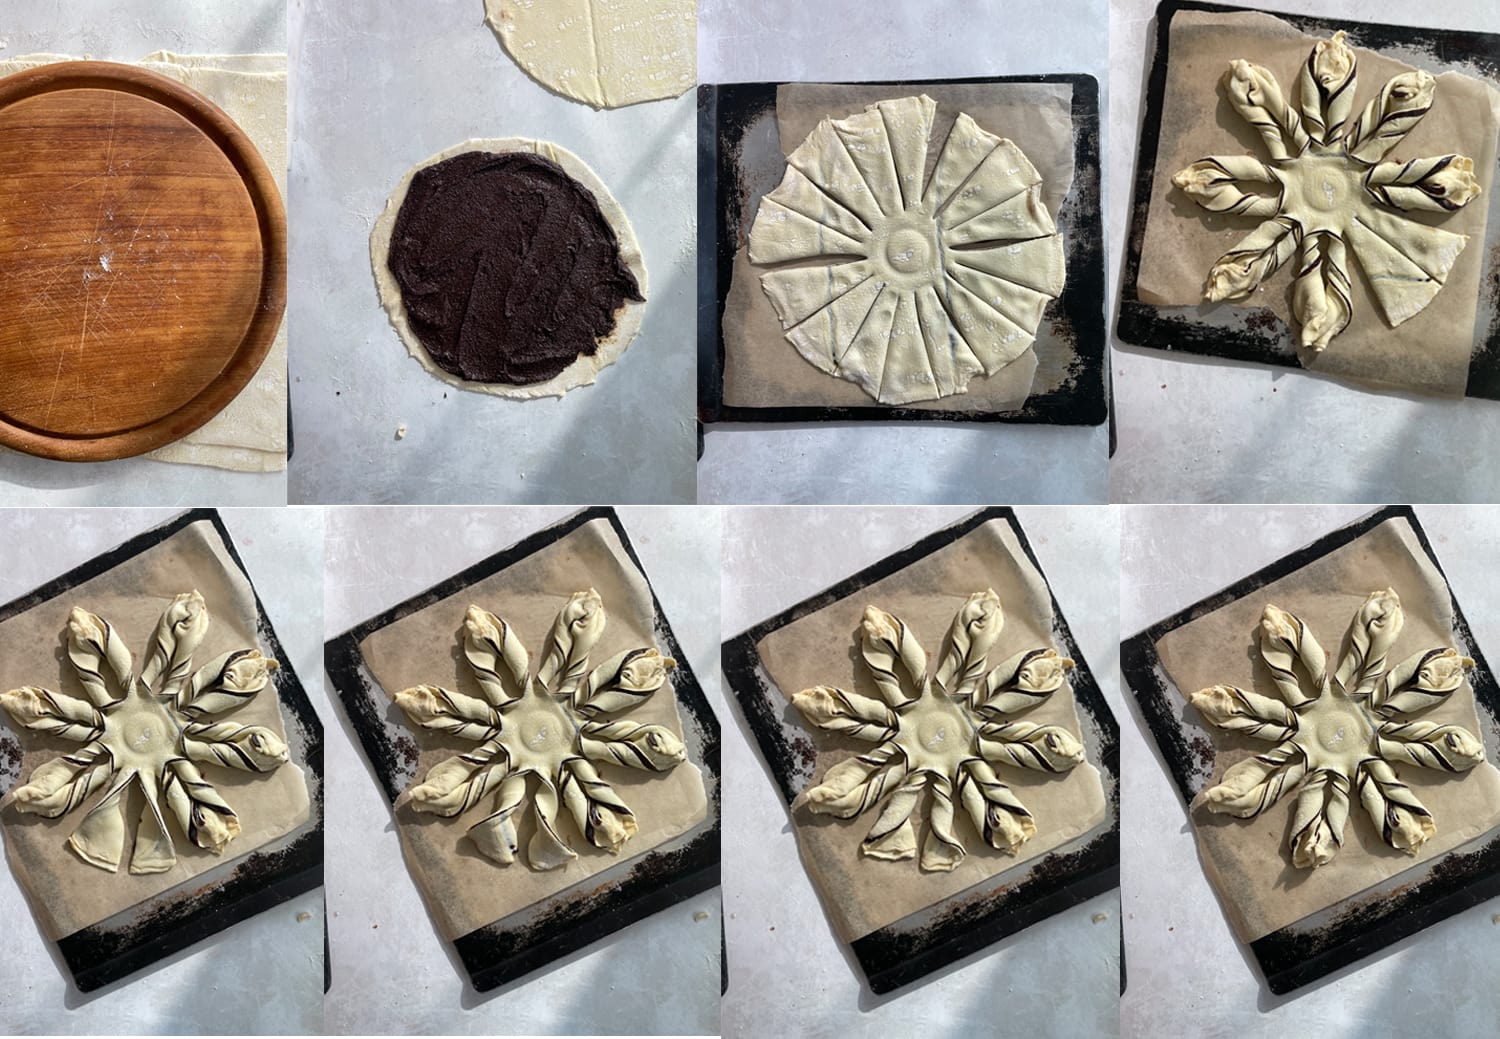 8 images showing how to assemble and shape the chocolate puff pastry snowflake. 